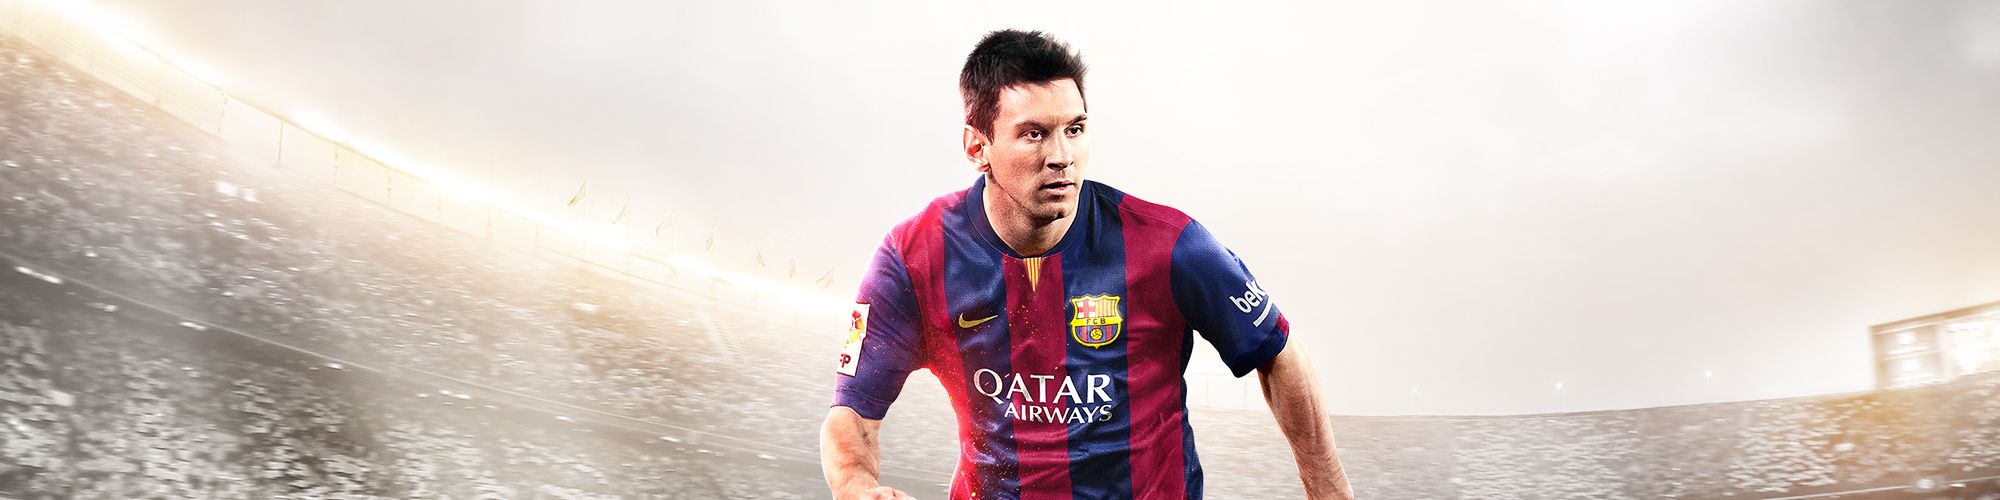 FIFA 15 technical specifications for laptop